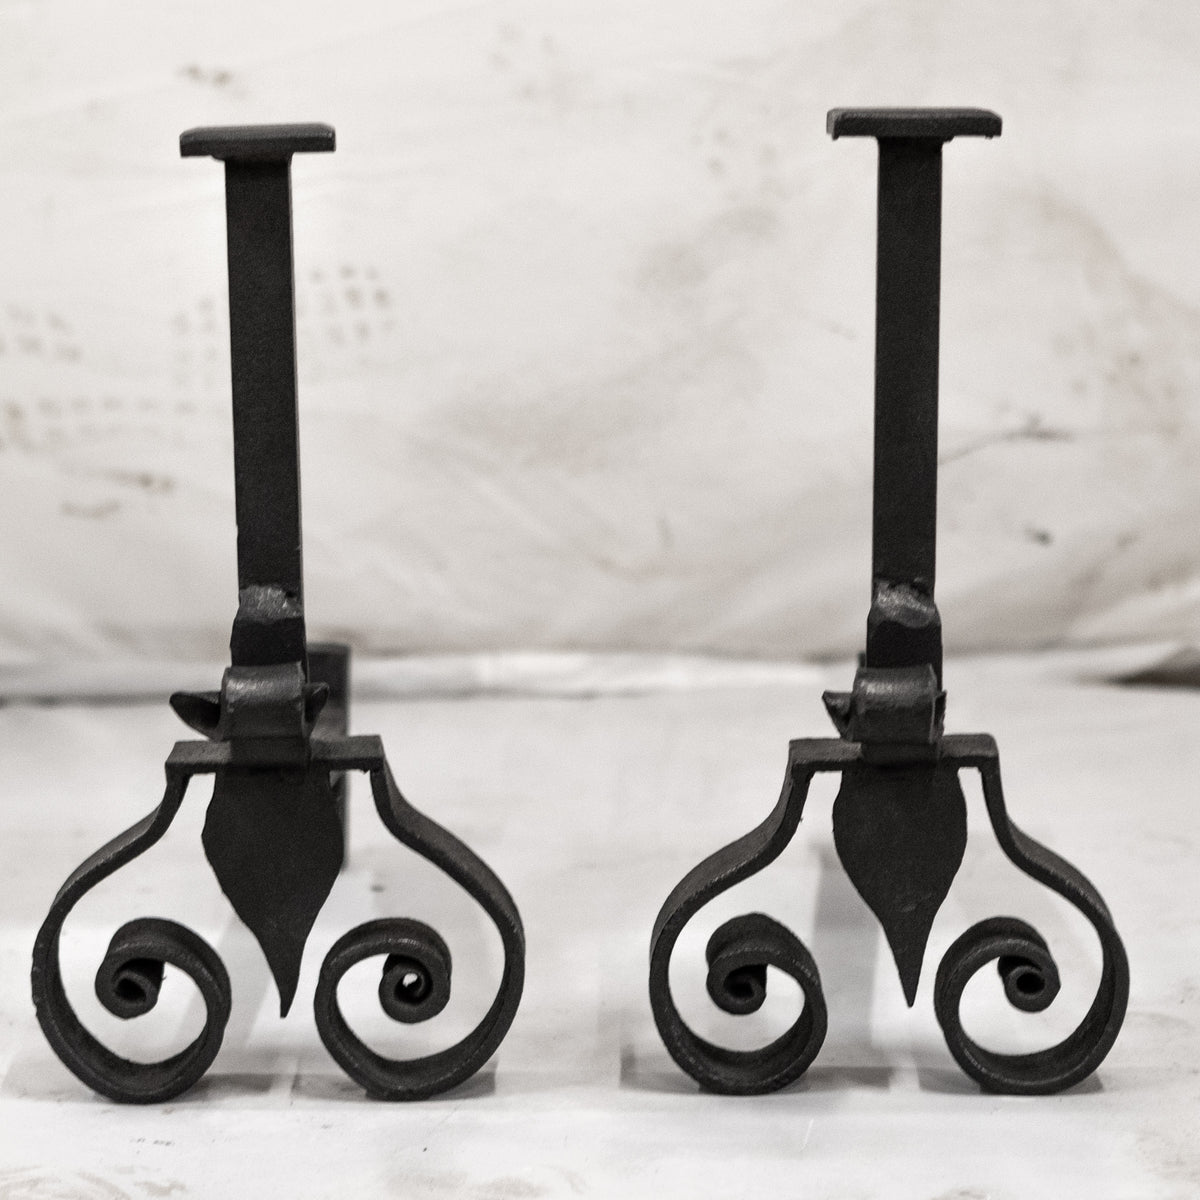 Antique Wrought Iron Firedogs | The Architectural Forum